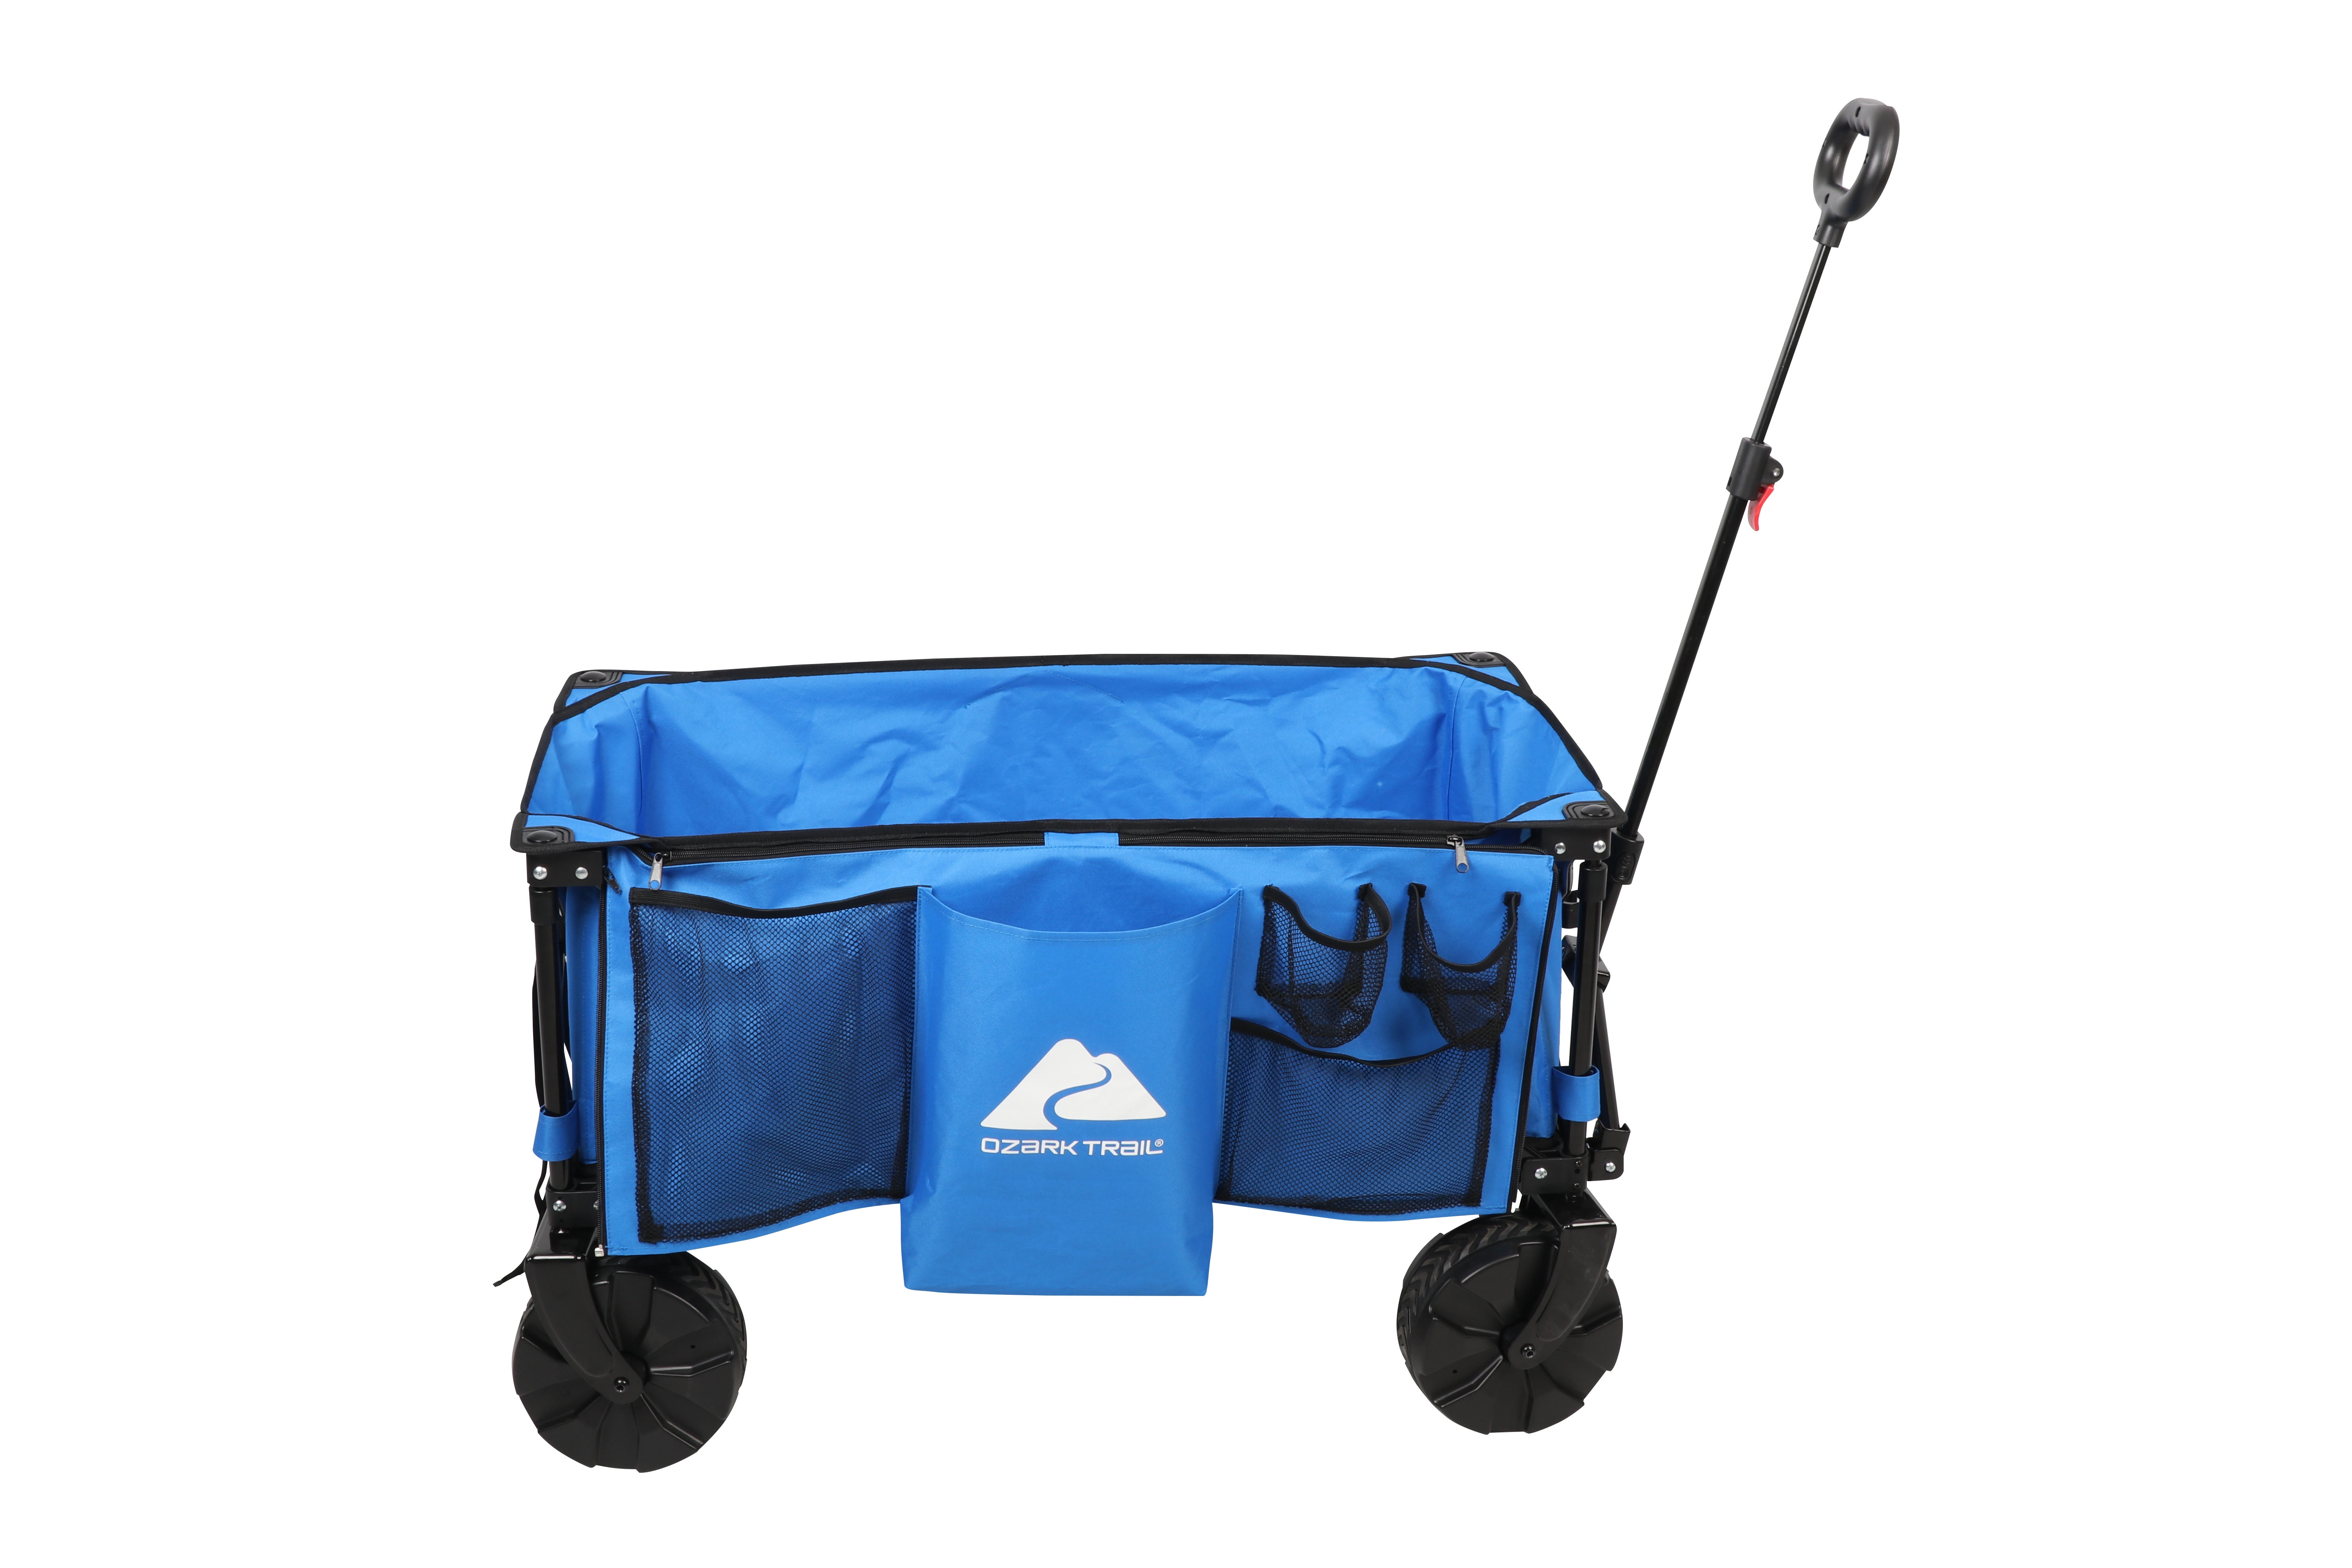 REDCAMP Soft Beach Cooler Bag Storage Basket Tools Bag and Pad for Utility Wagon 